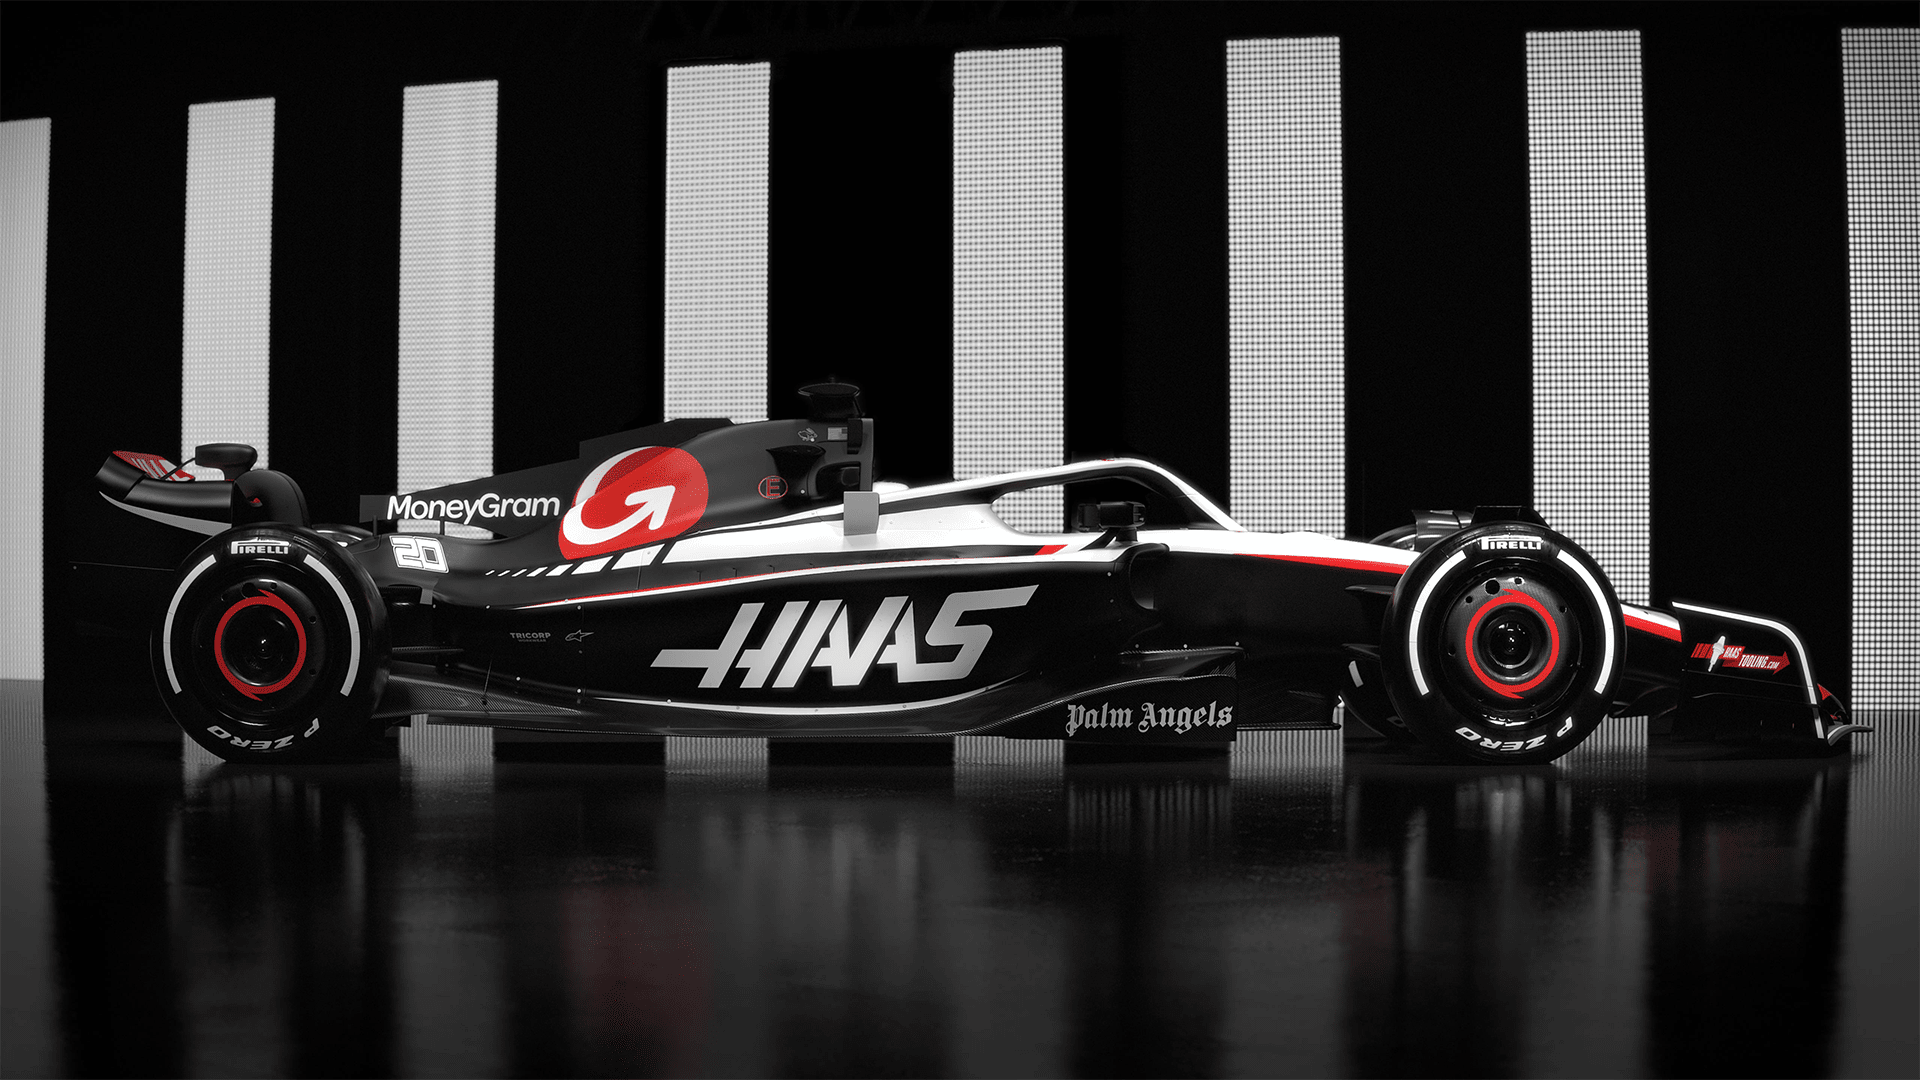 GALLERY: Take A Closer Look At The All New Haas Livery For The 2023 F1 Season. Formula 1®